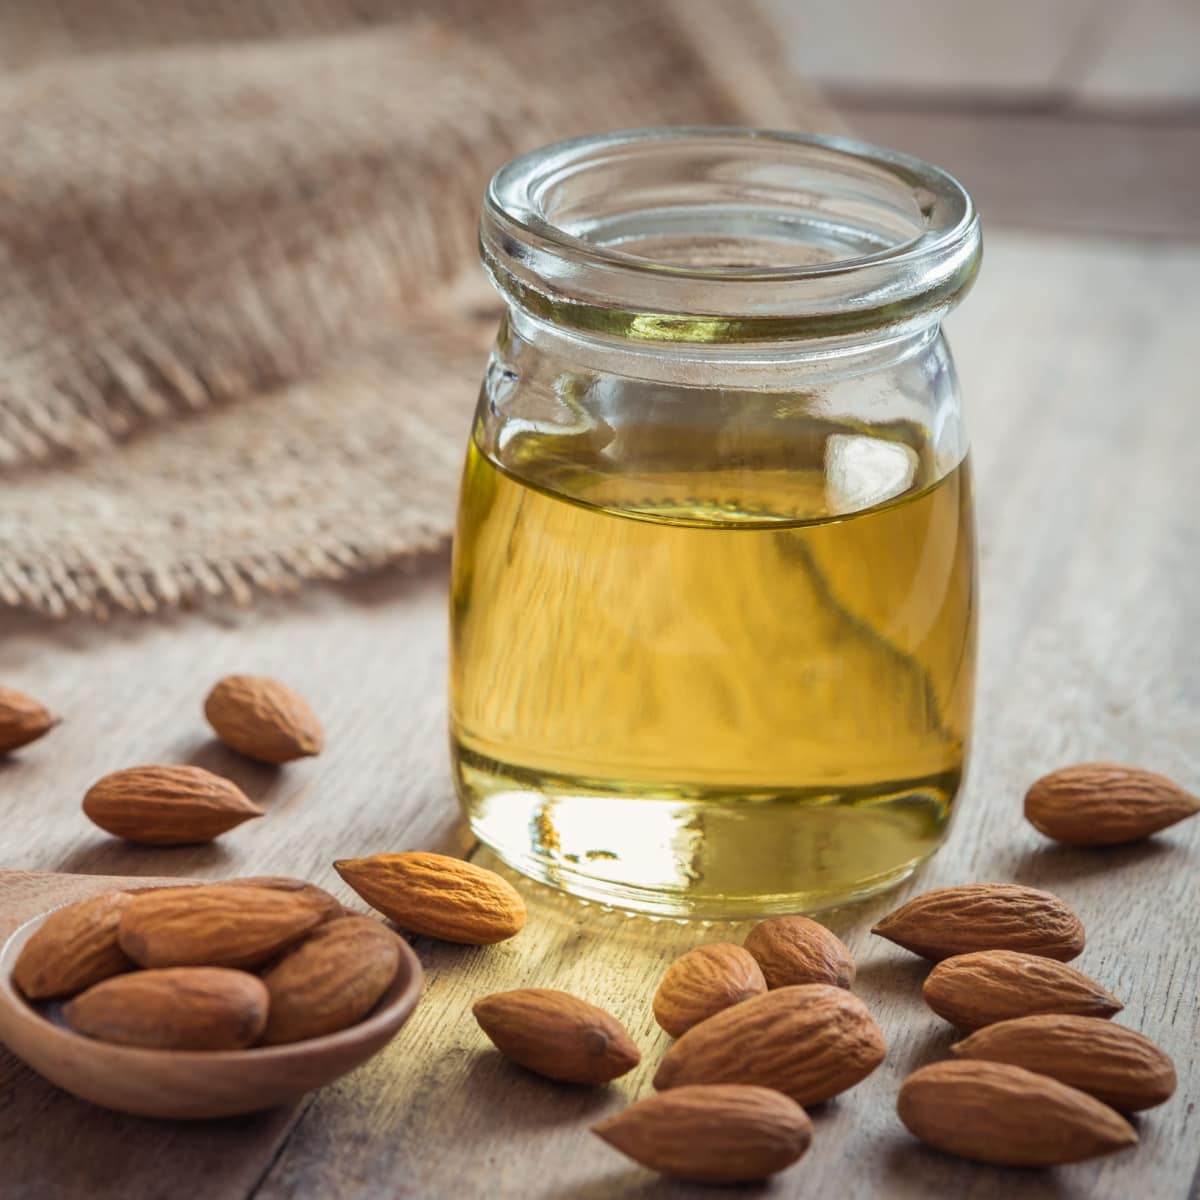 Bottle of Almond Oil and Raw Almonds on a Wooden Table